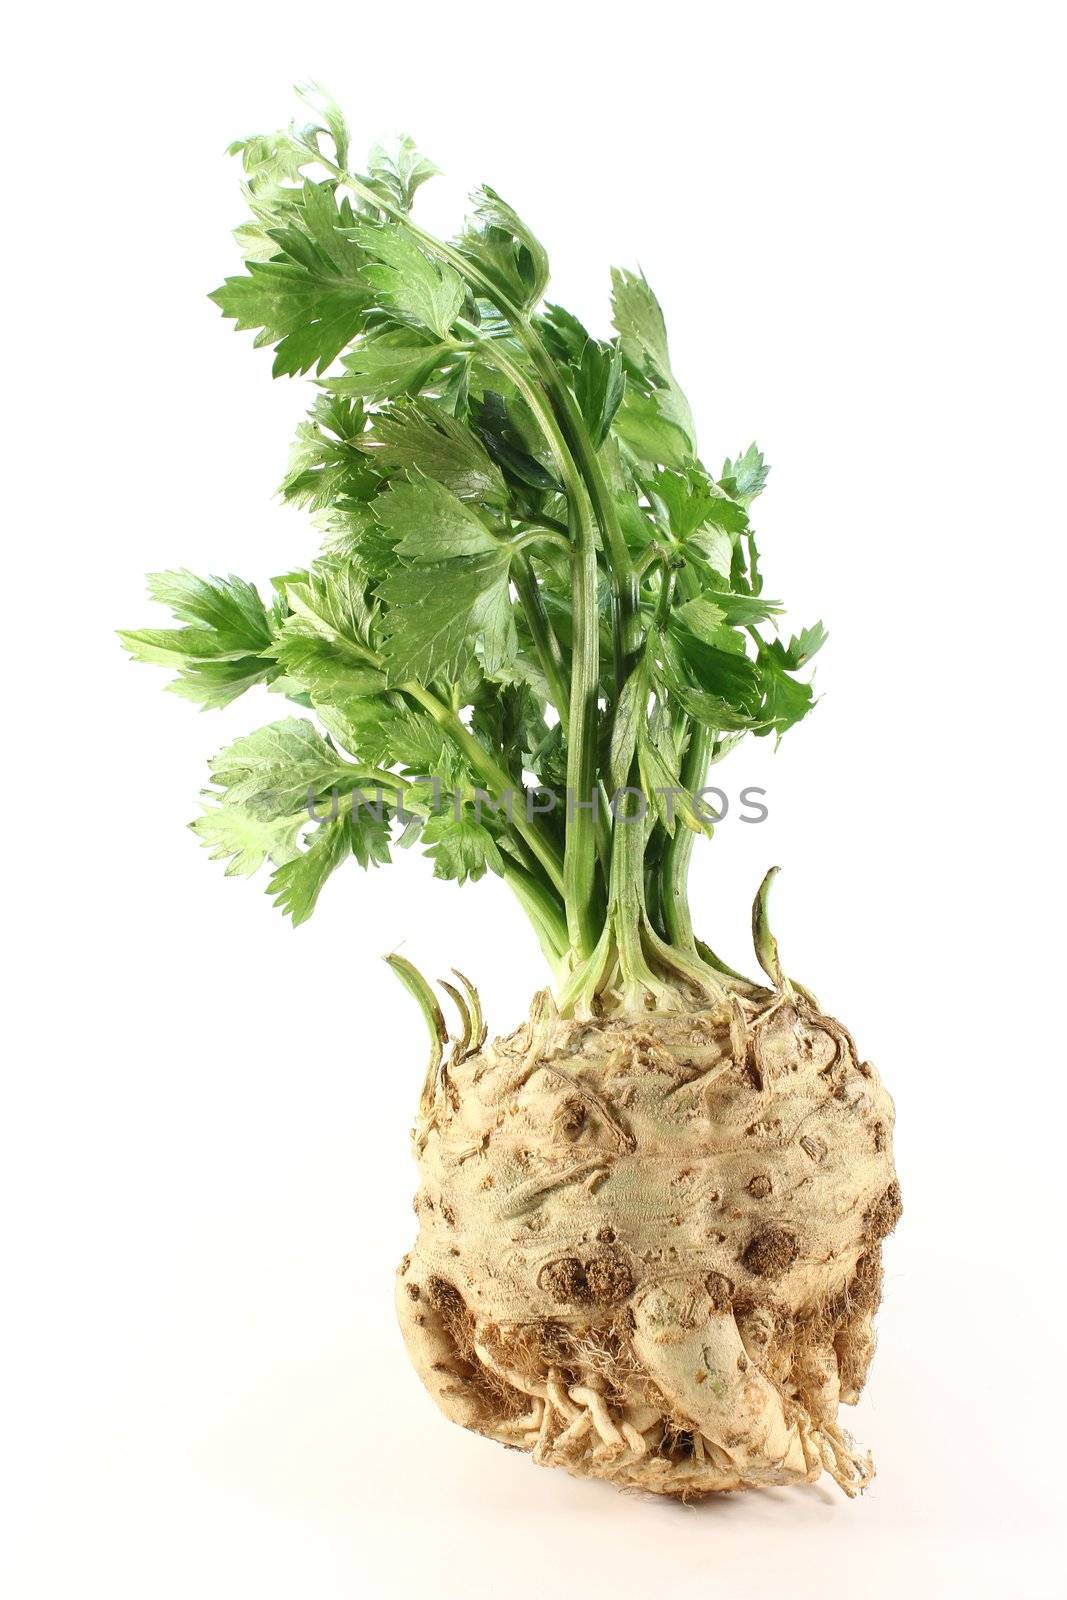 whole celery with green leaves on white background